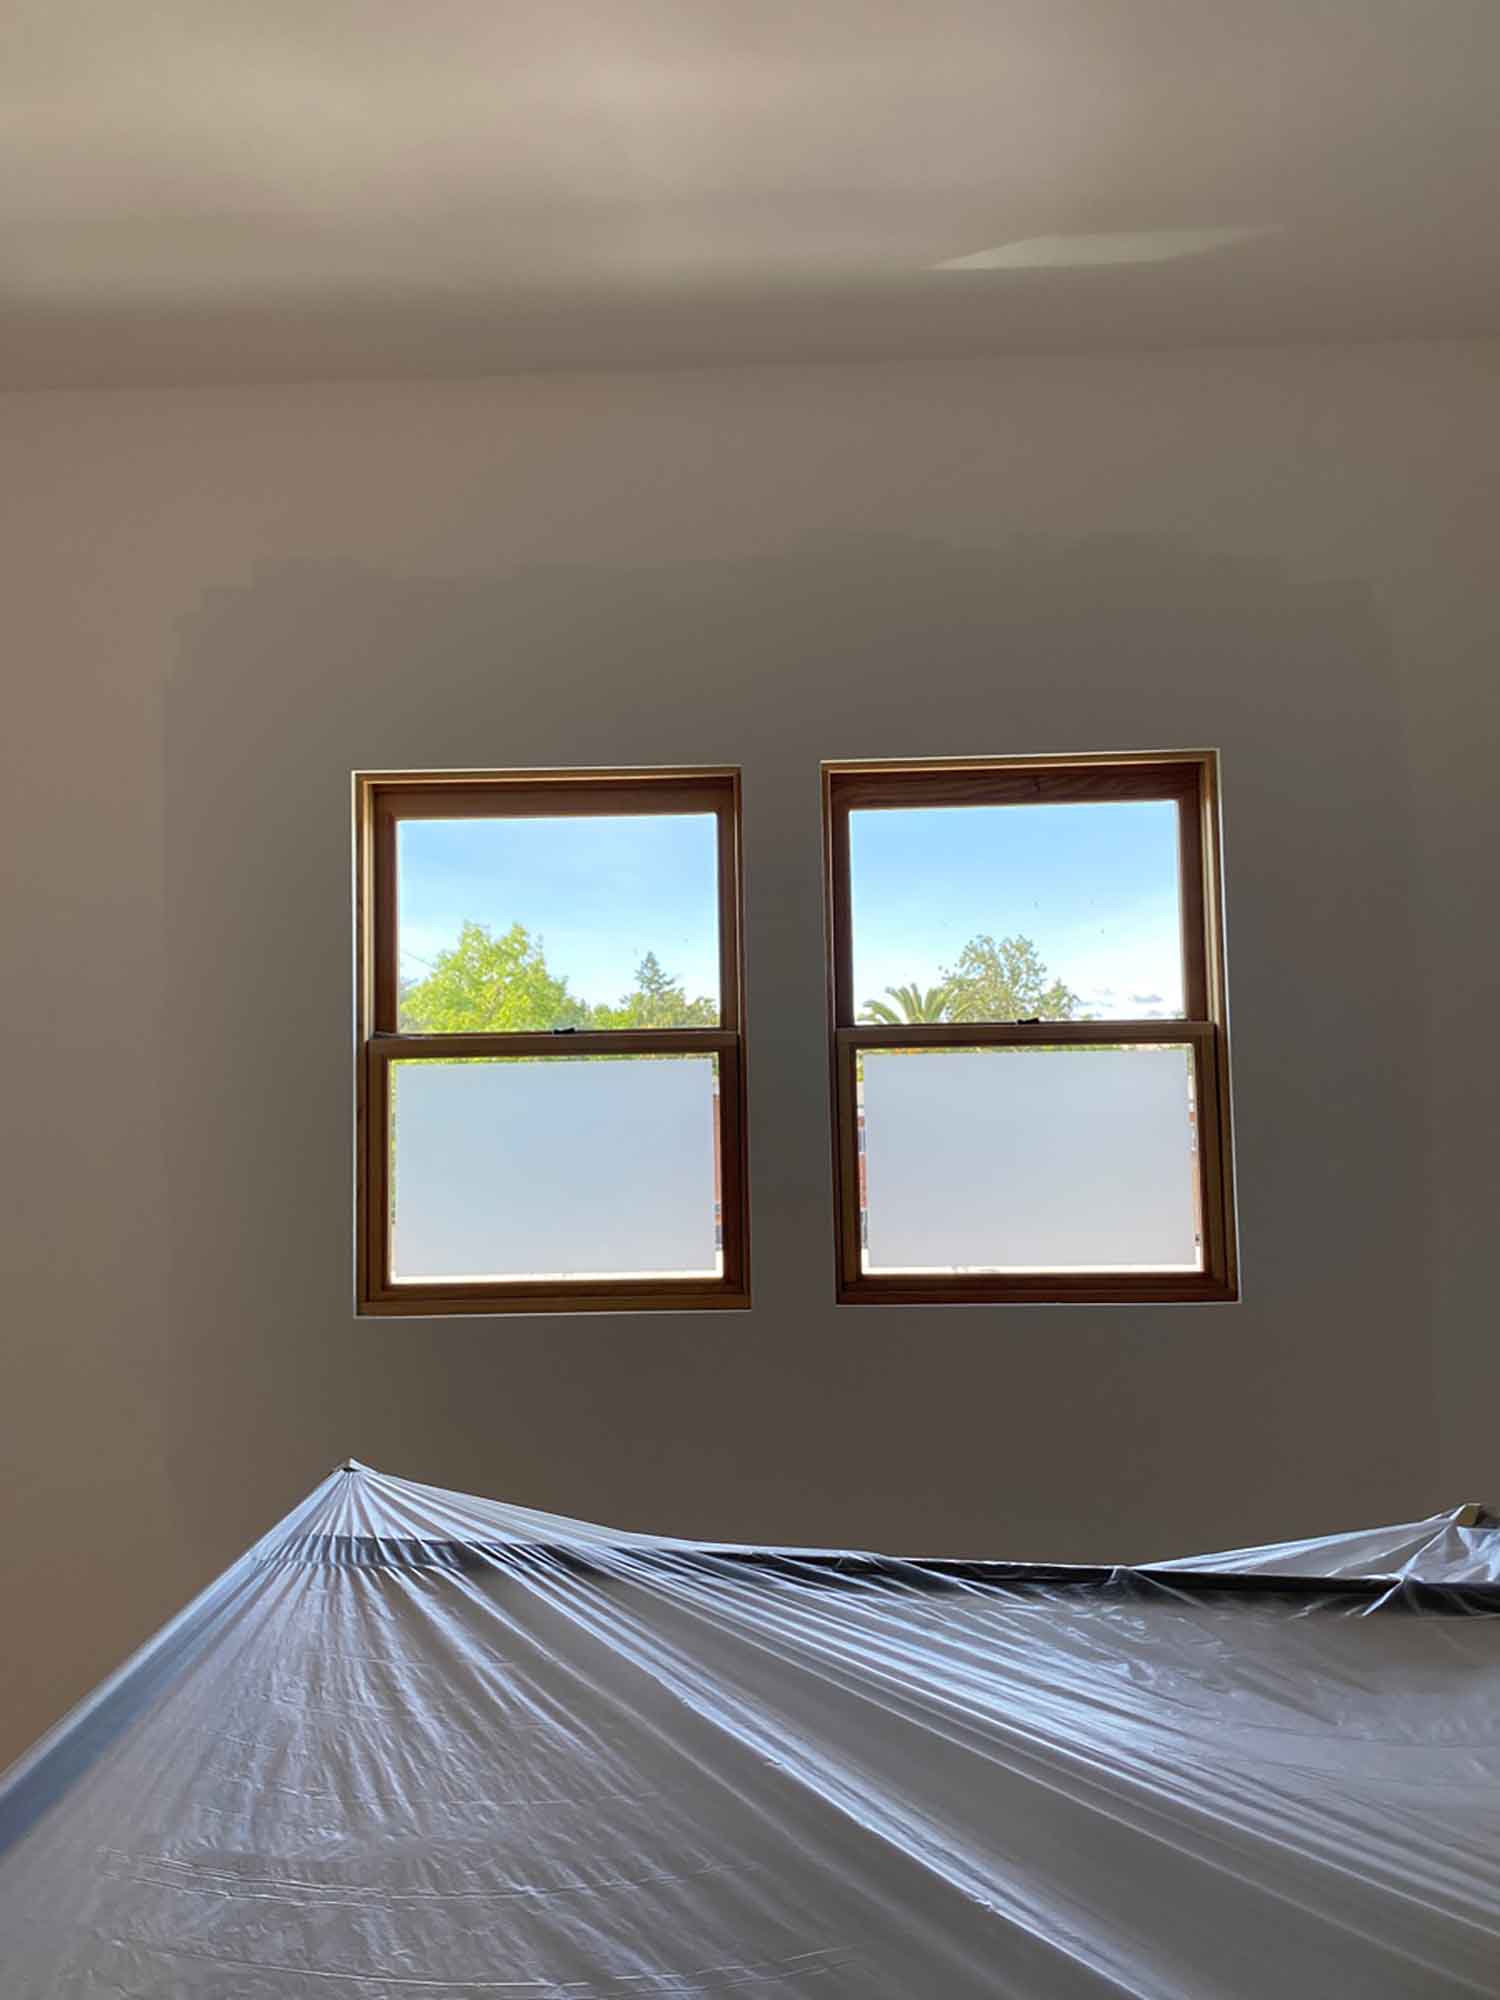 ClimatePro installed 3M Privacy Window Film for a home in Sonoma, CA.